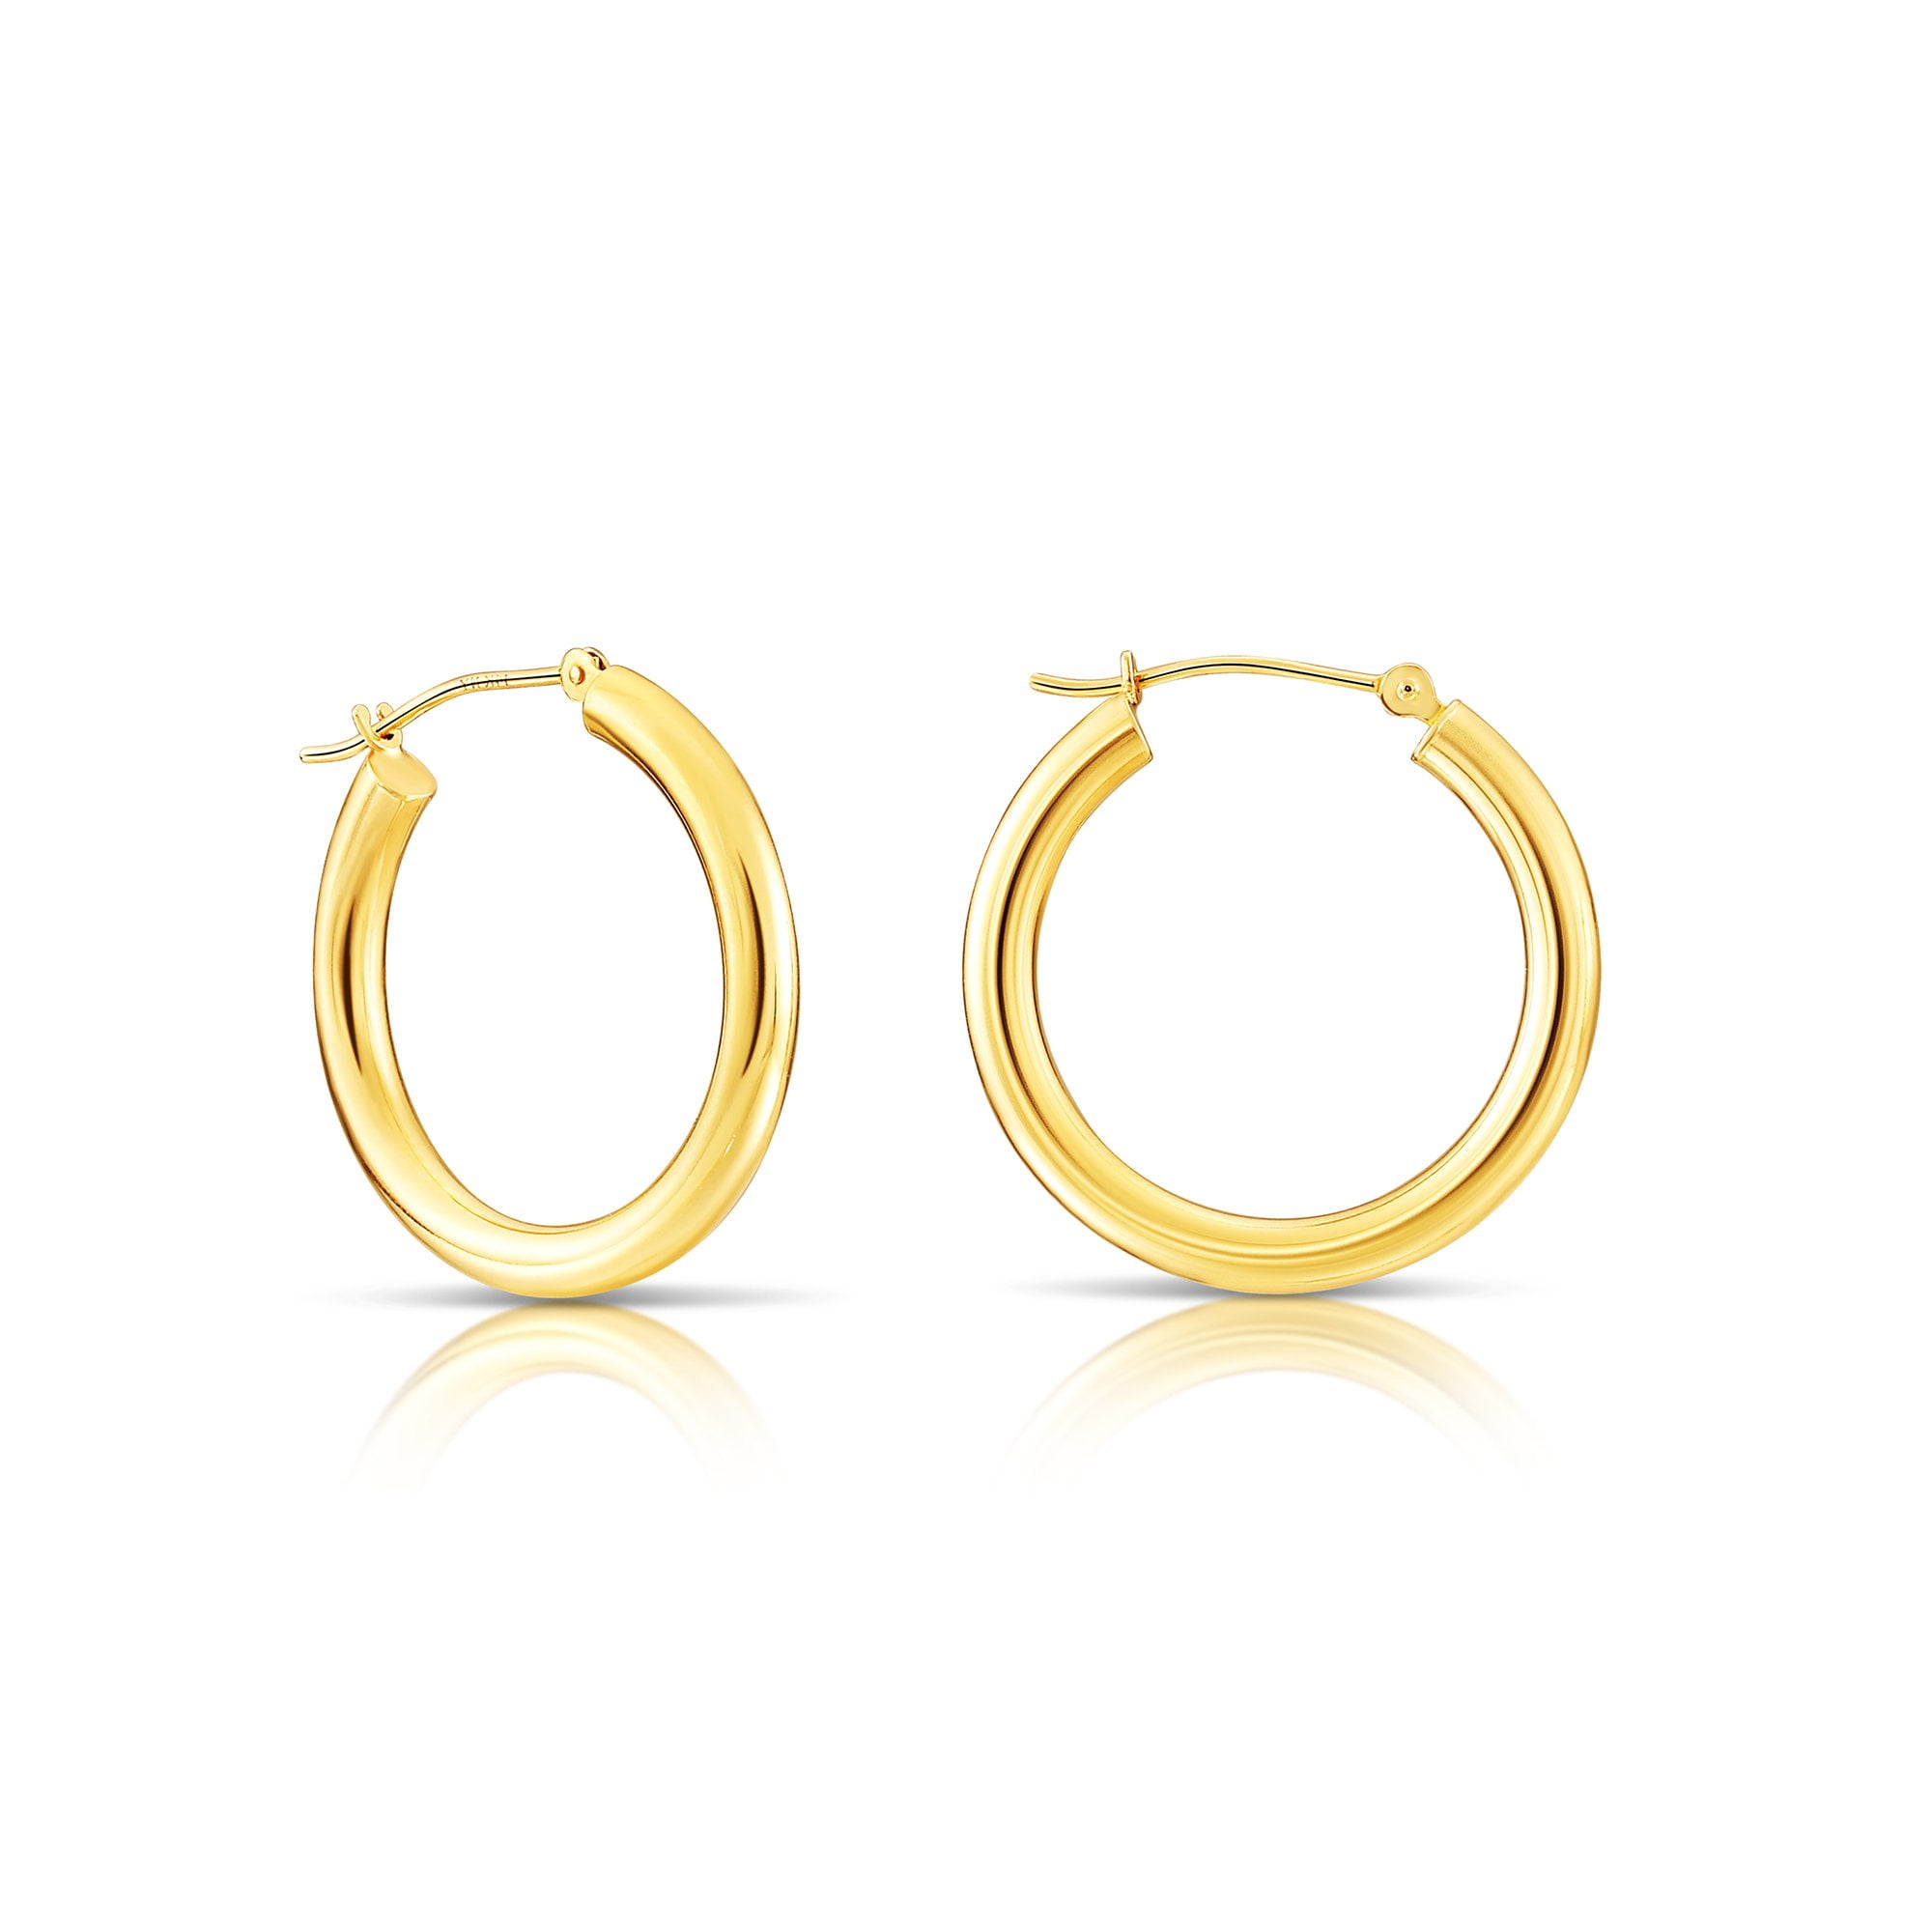 14k Yellow Gold Classic Shiny Polished Round Hoop Earrings 2mm tube